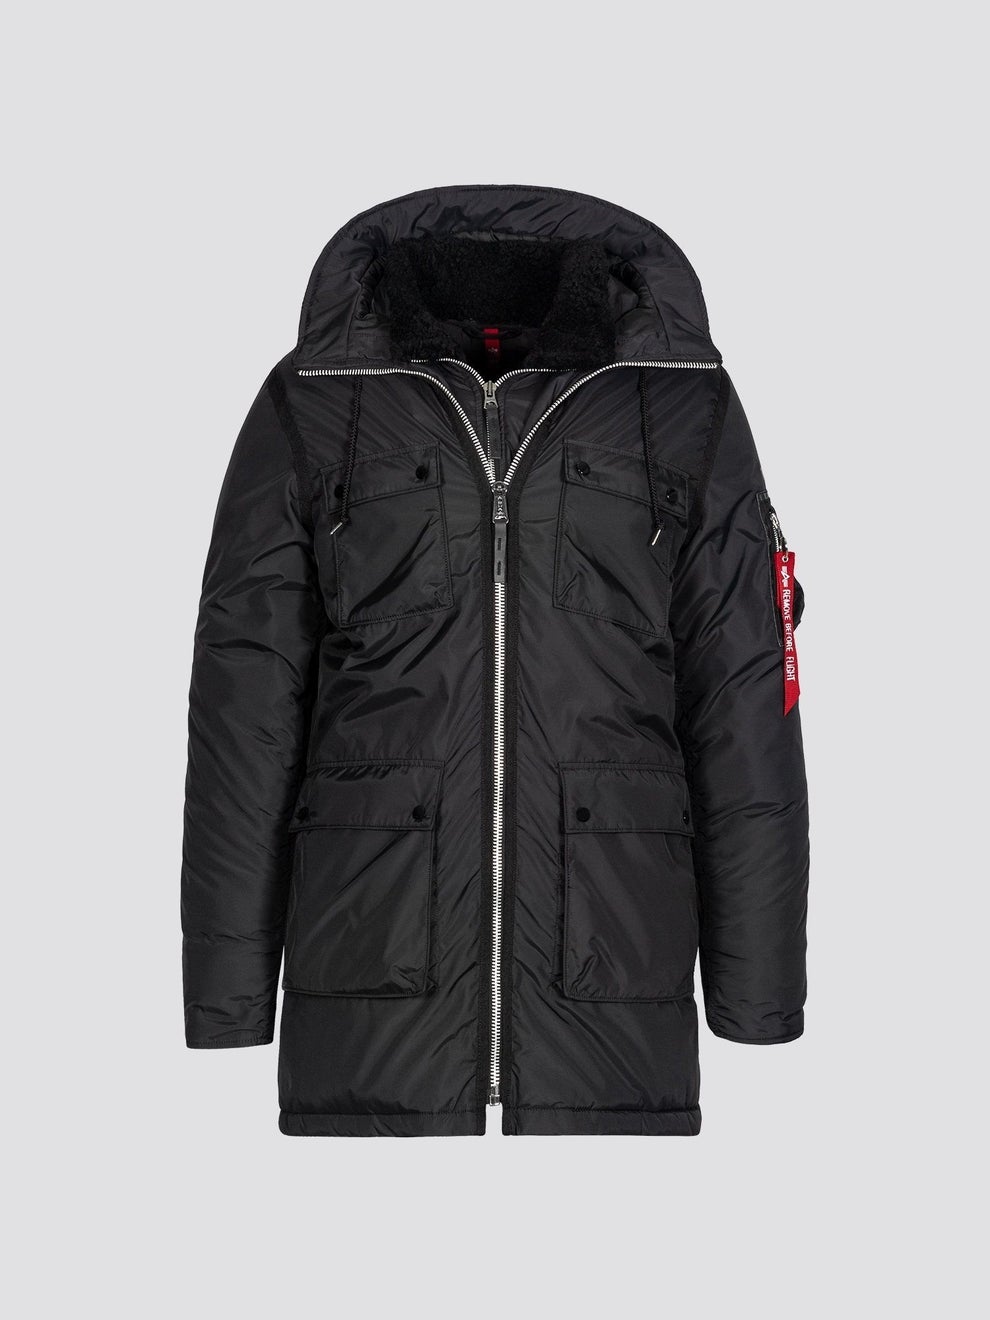 Alpha Industries Cyber Monday Sale Is Here